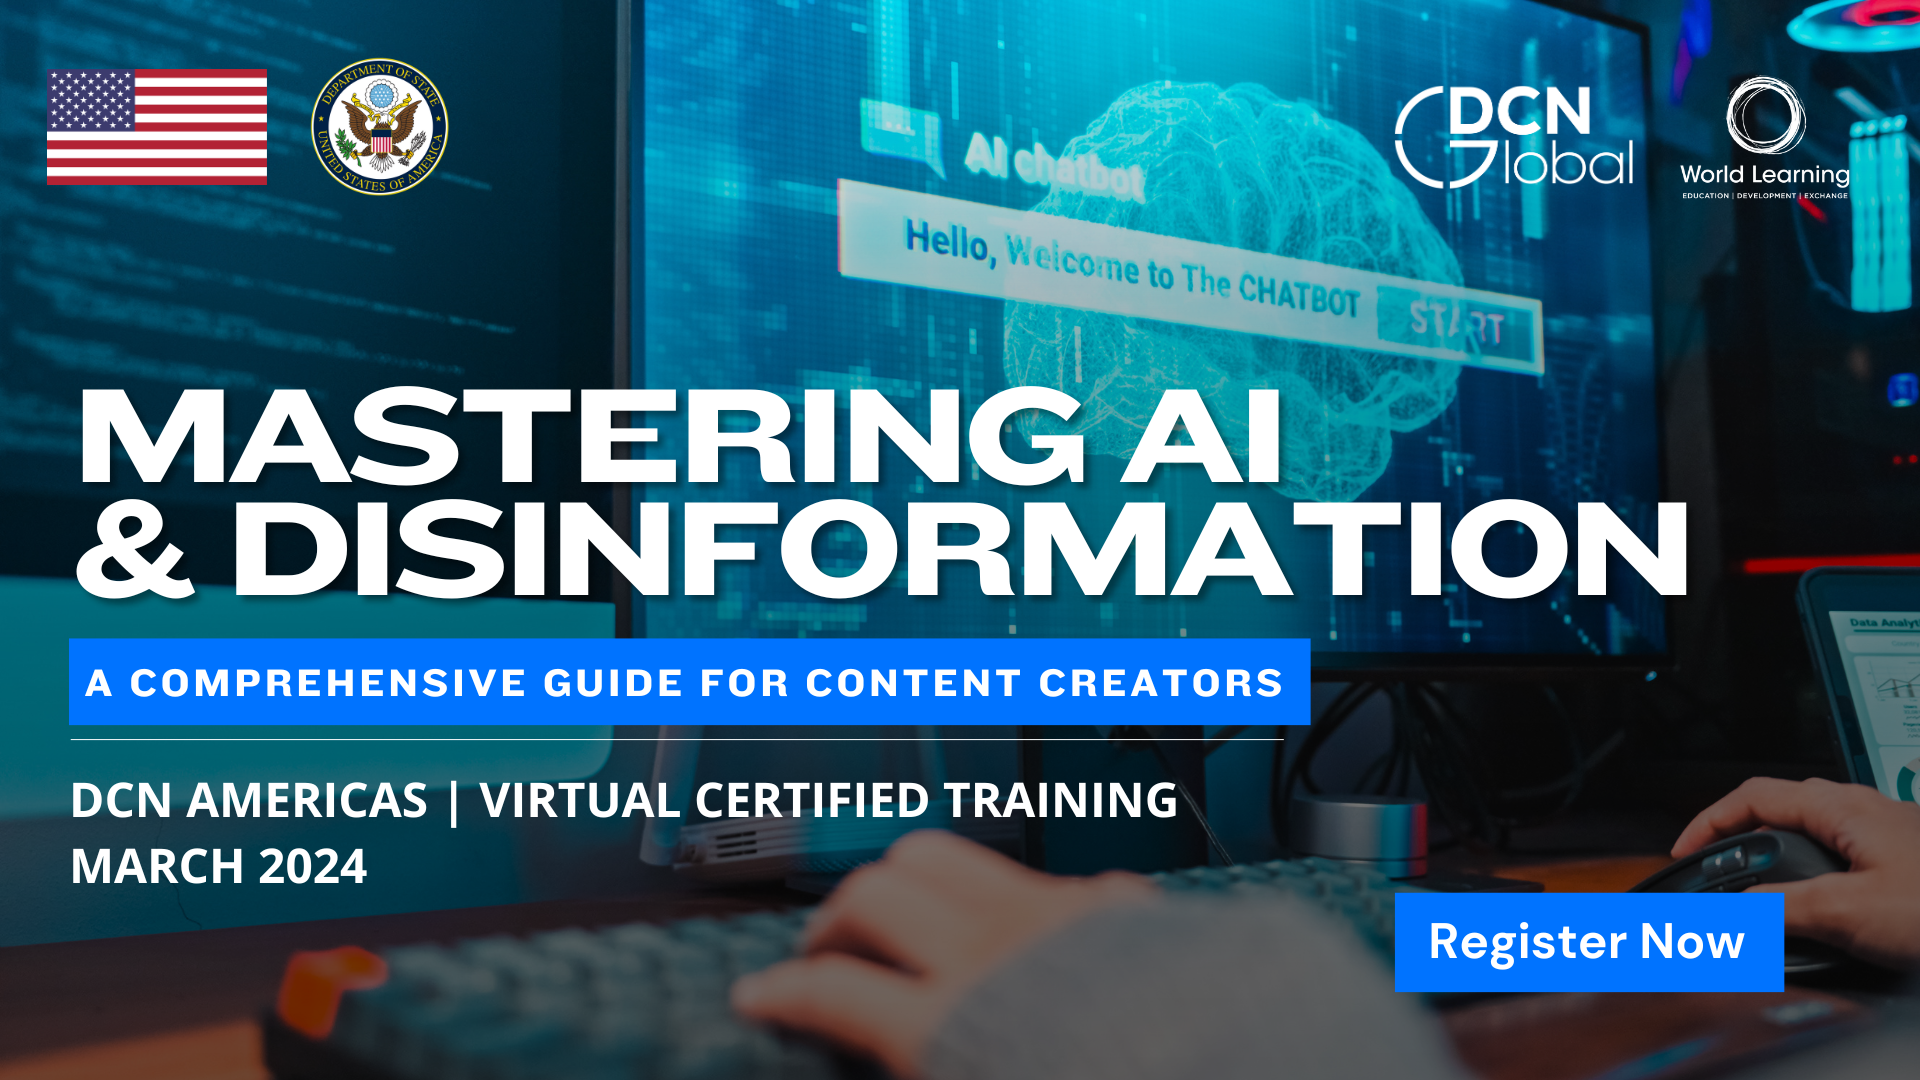 Mastering AI and Disinformation: A Comprehensive Guide for Content Creators